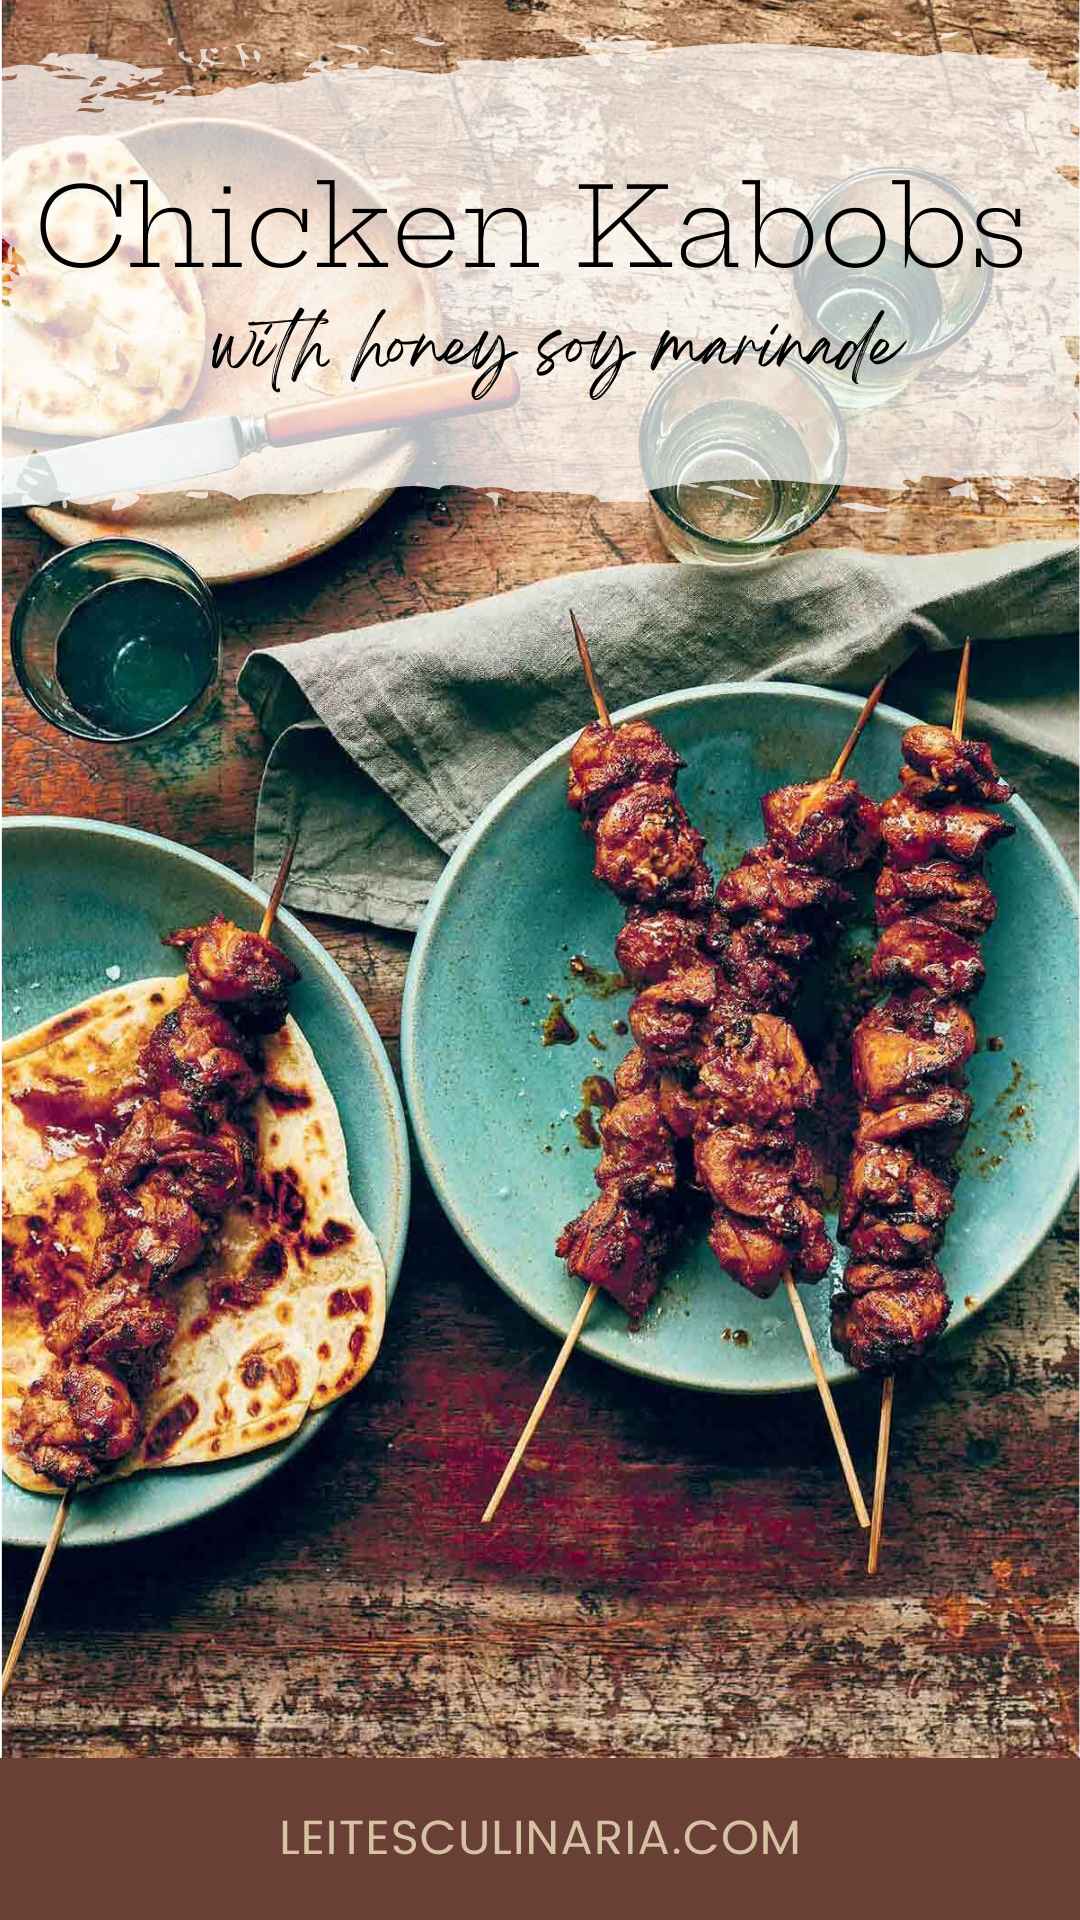 Three marinated chicken skewers on a blue plate with another skewer on top of a flatbread on a second plate.